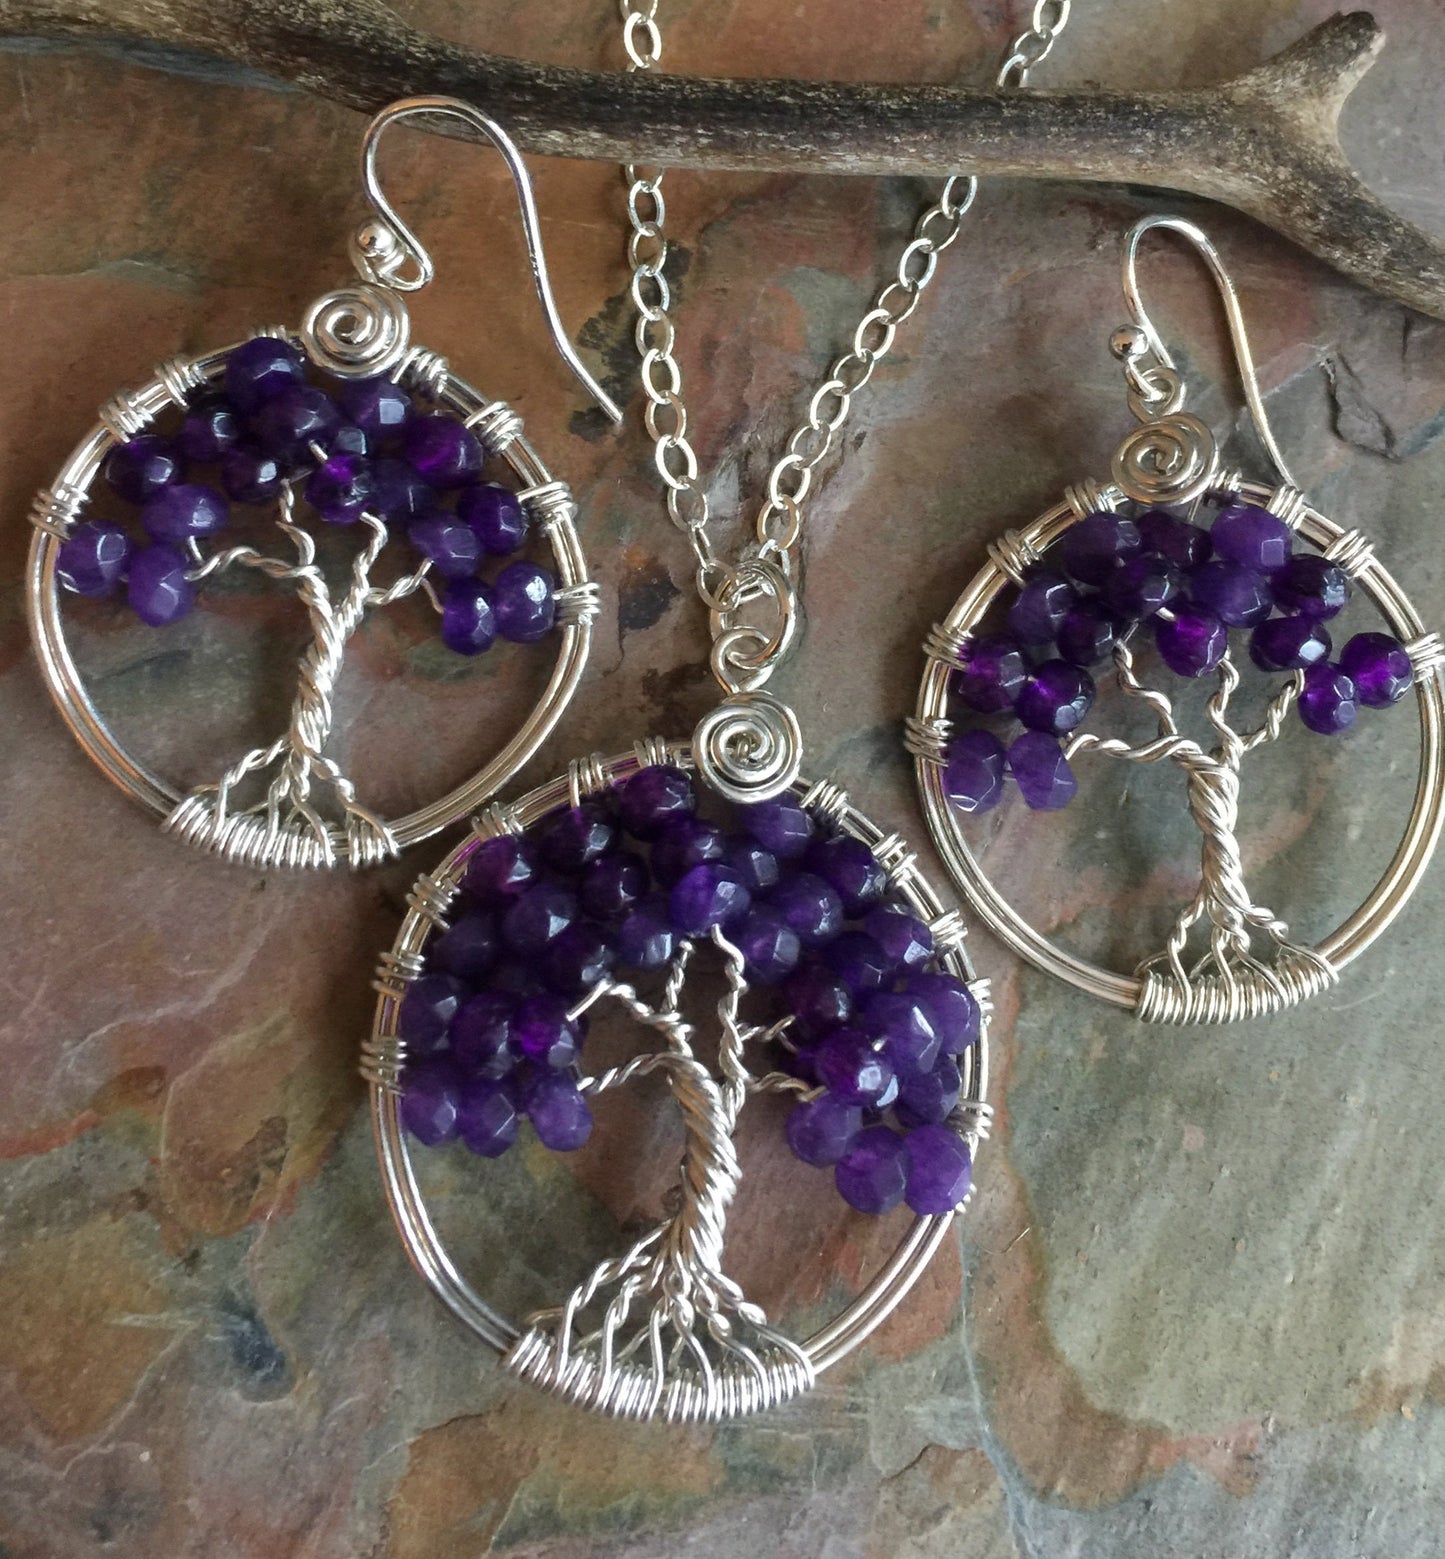 Amethyst Necklace,Amethyst Tree of Life Necklace,February Birthstone Necklace Sterling Silver,Amethyst Earrings,Amethyst Tree Life Earrings